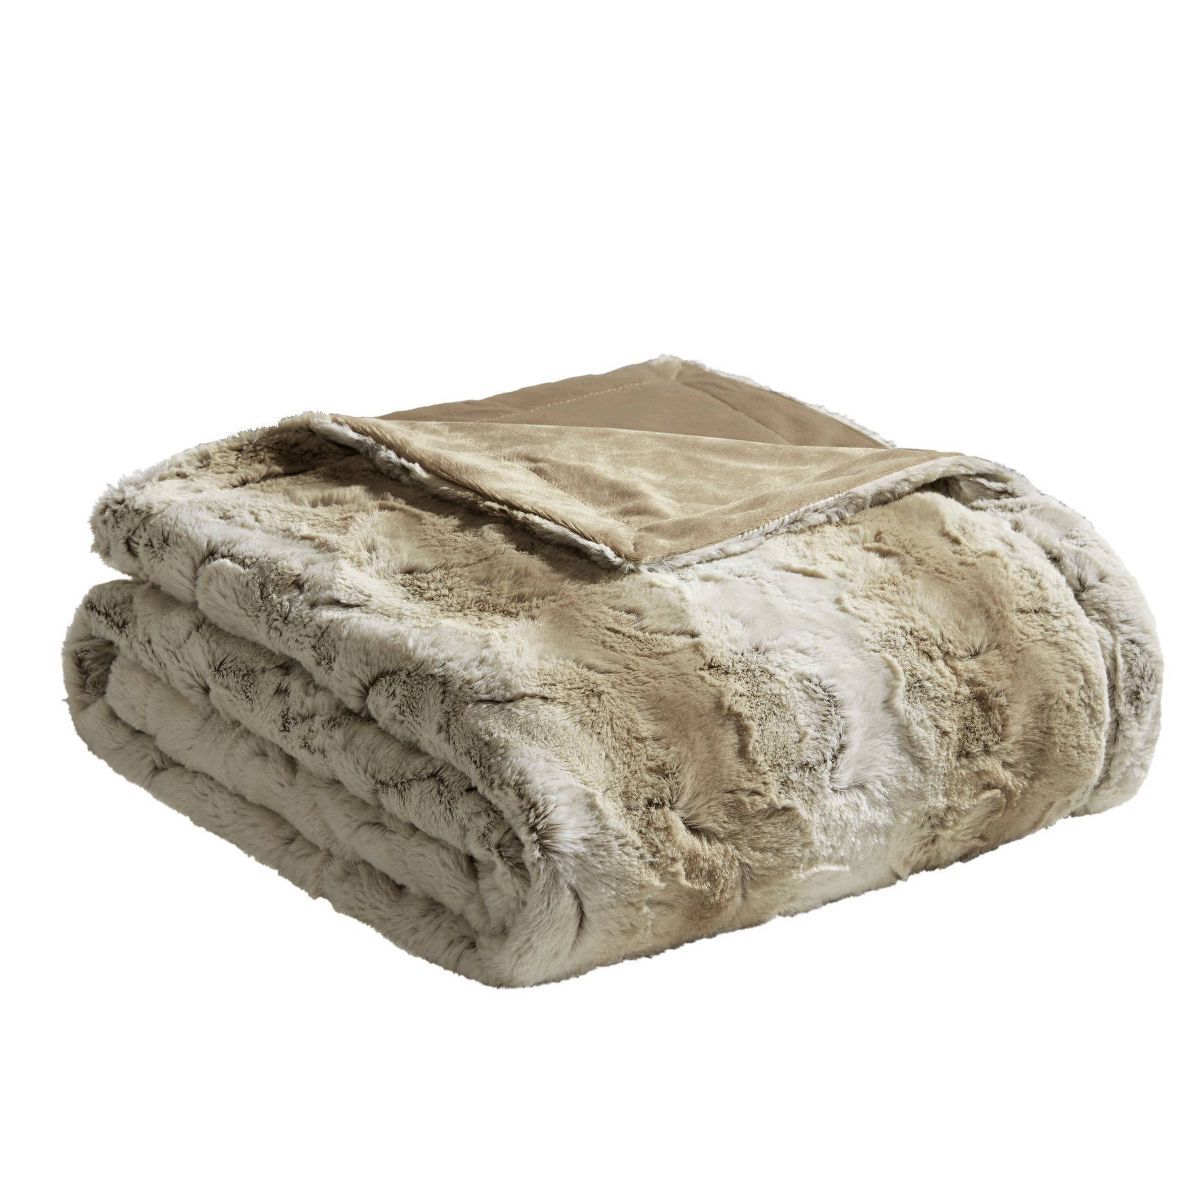 60"x70" Oversized Marselle Faux Fur Throw Blanket - Madison Park | Target